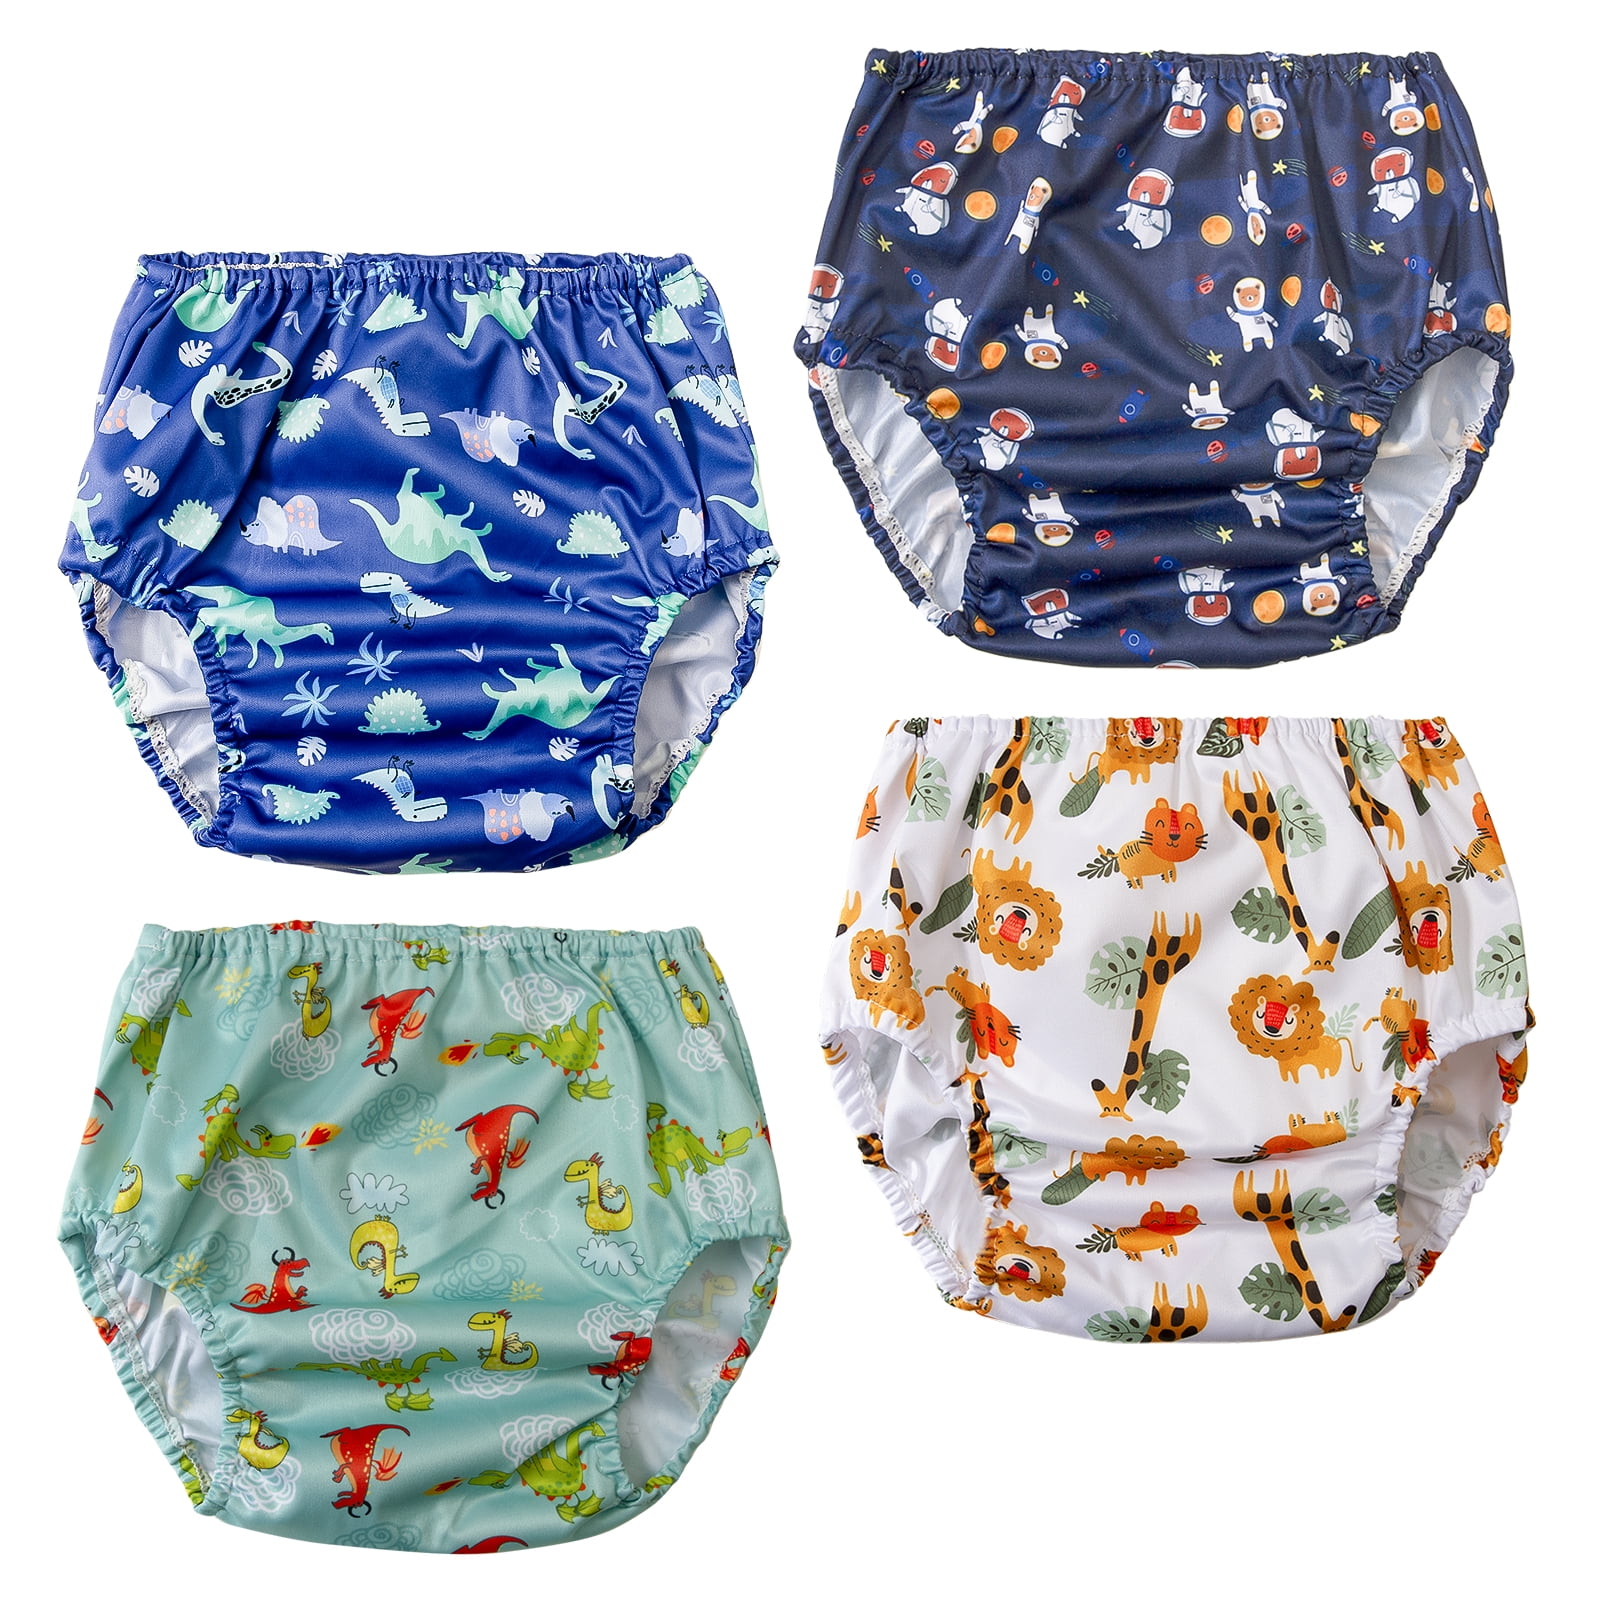 Rubber Training Pants for Toddlers 2T Plastic Underwear Covers for Potty  Training Diaper Cover Rubber Pants for Toddlers Training Pants Boys Swim  Diaper Covers for Toddlers Plastic Training Pants 